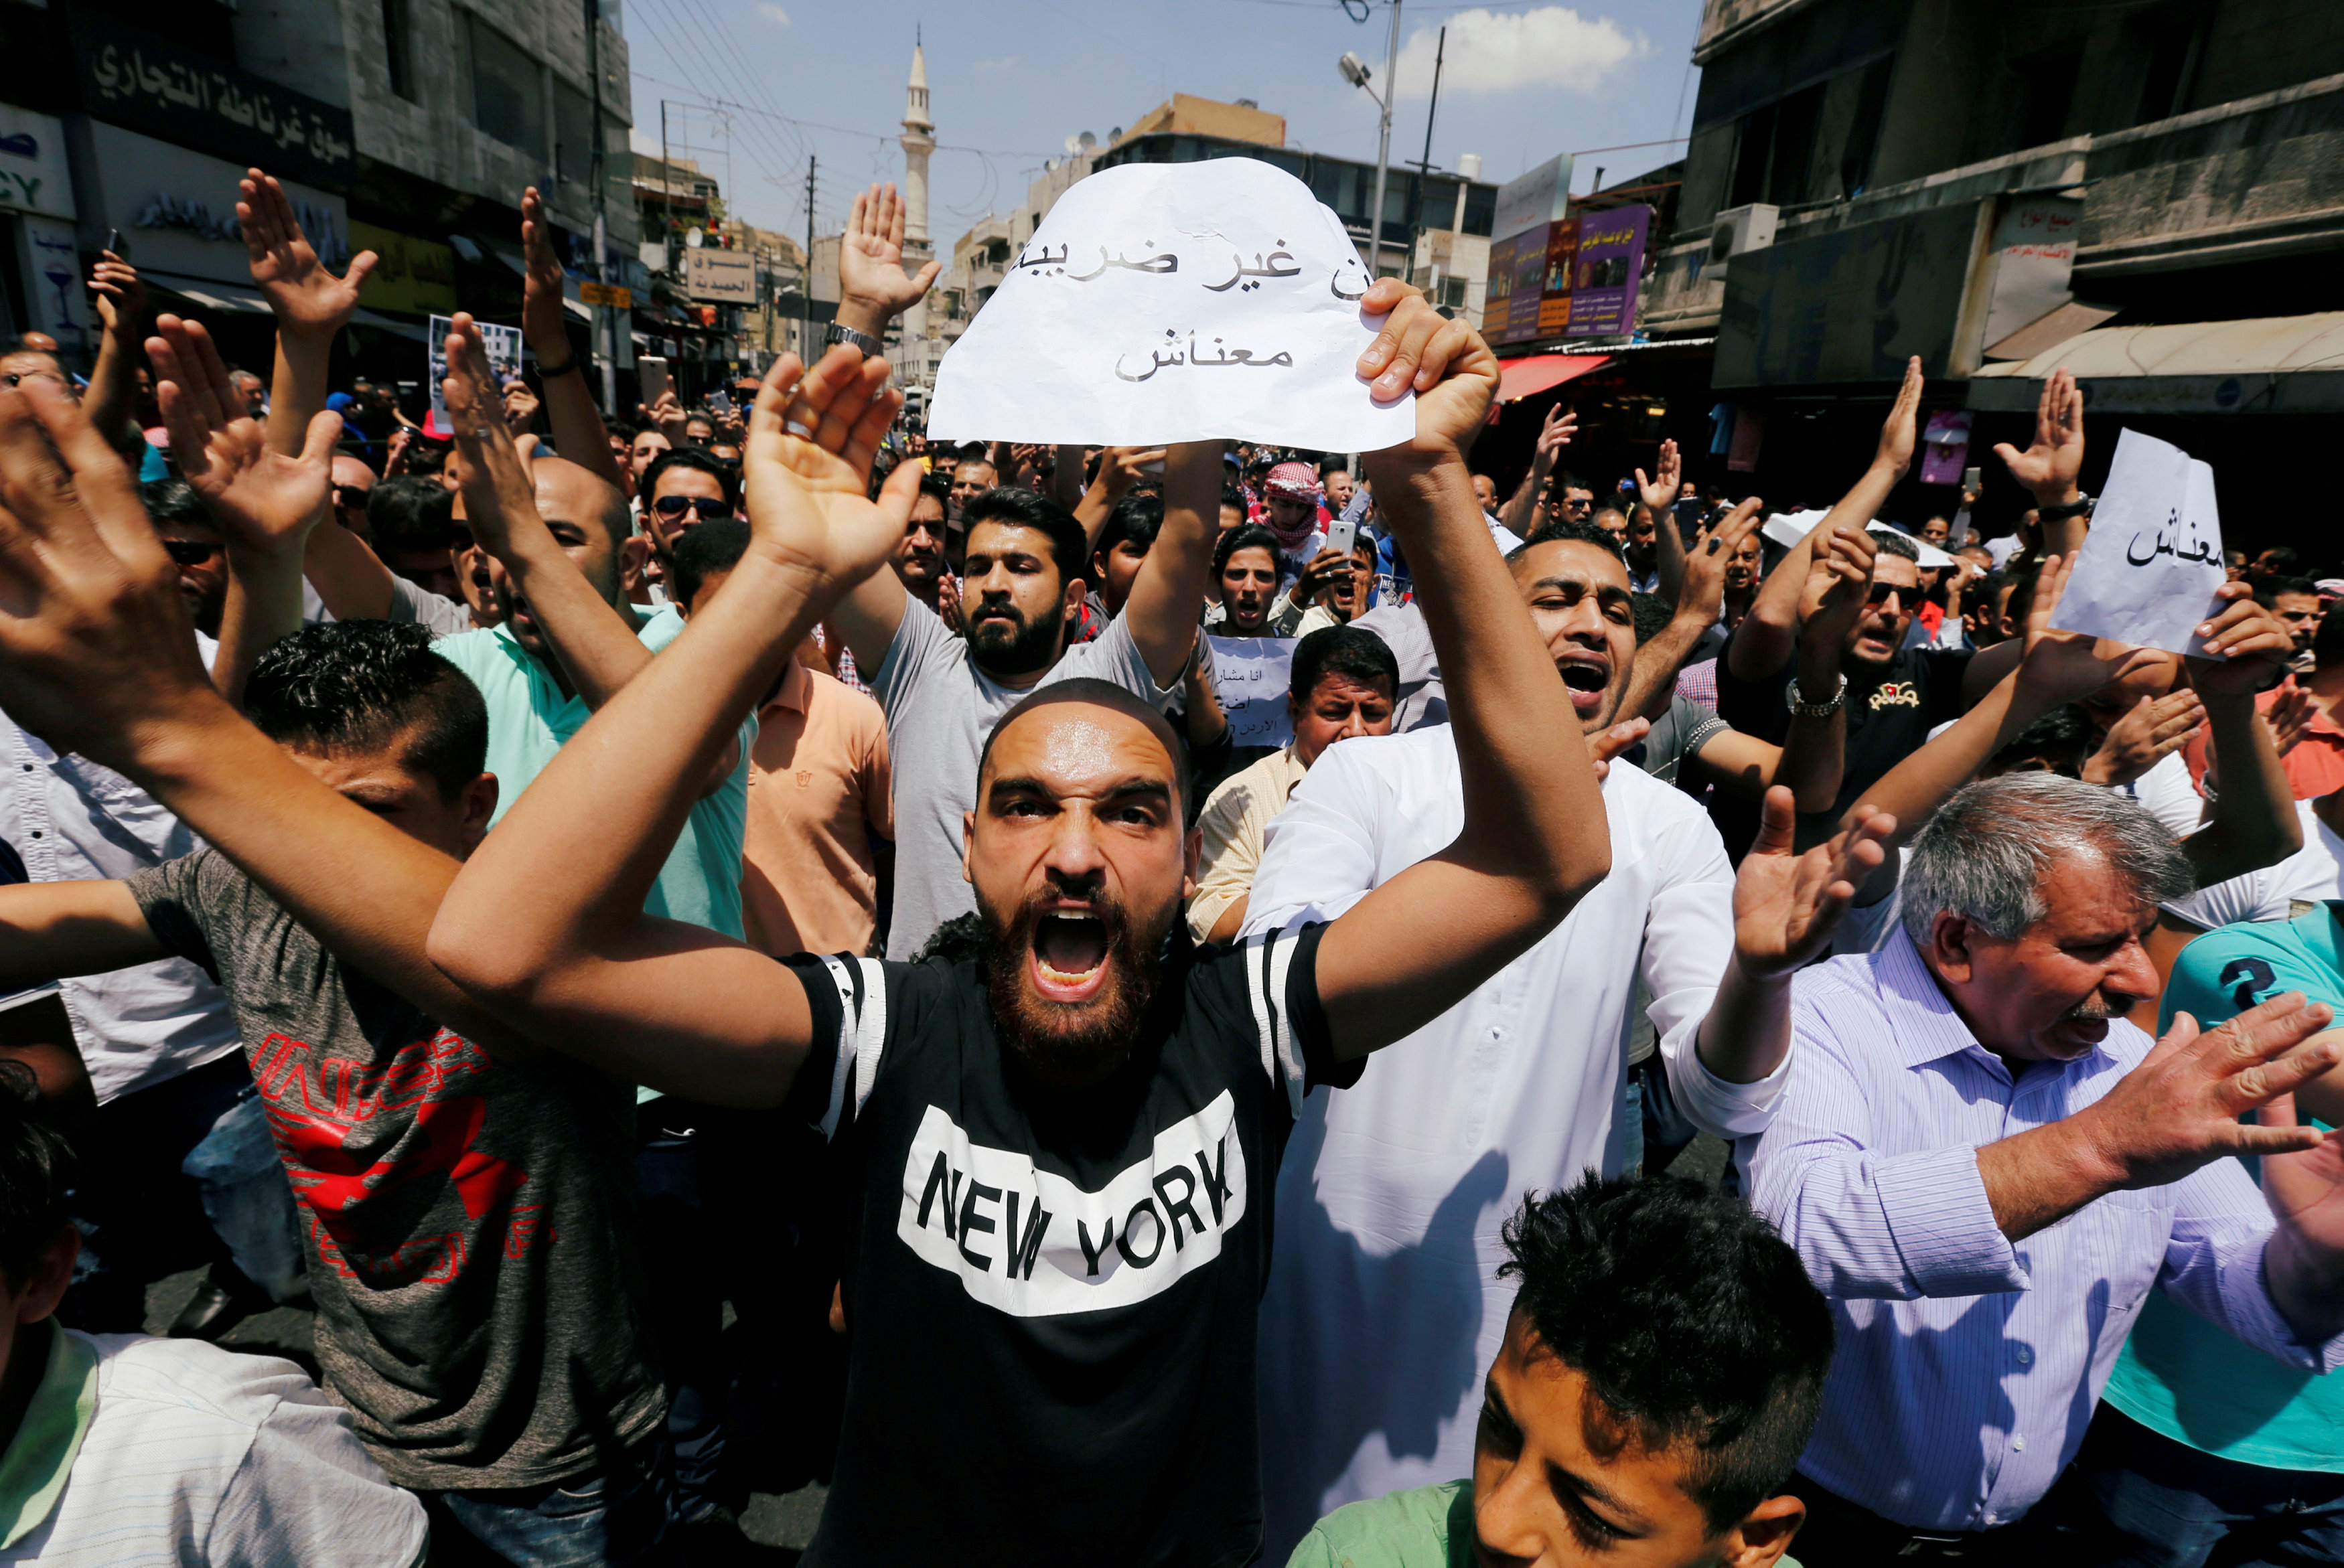 Protesters chant slogans during a protest against the new income tax law and high fuel prices, in Amman